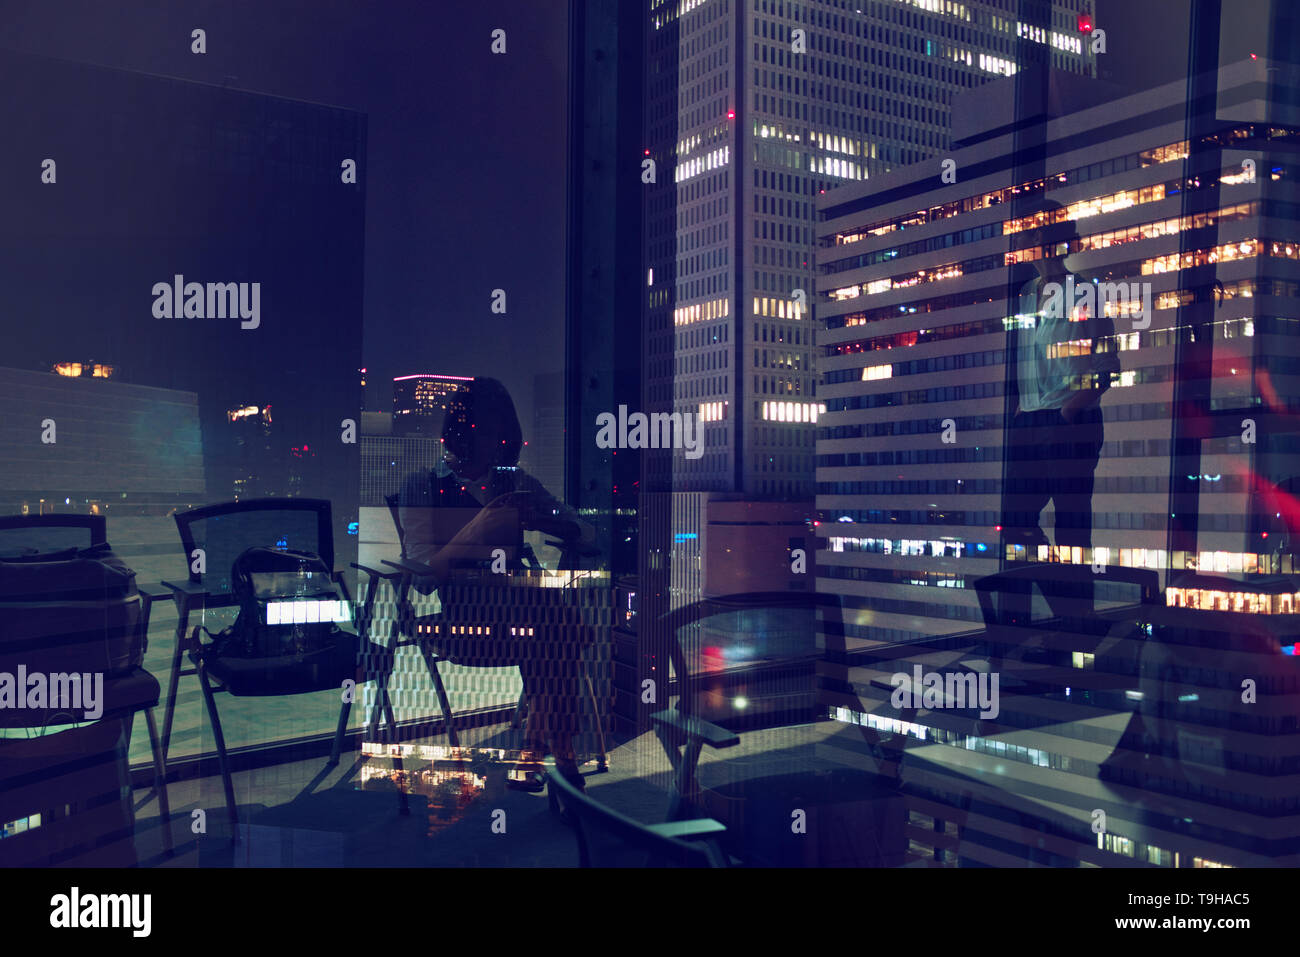 Background of business people that work during night Stock Photo